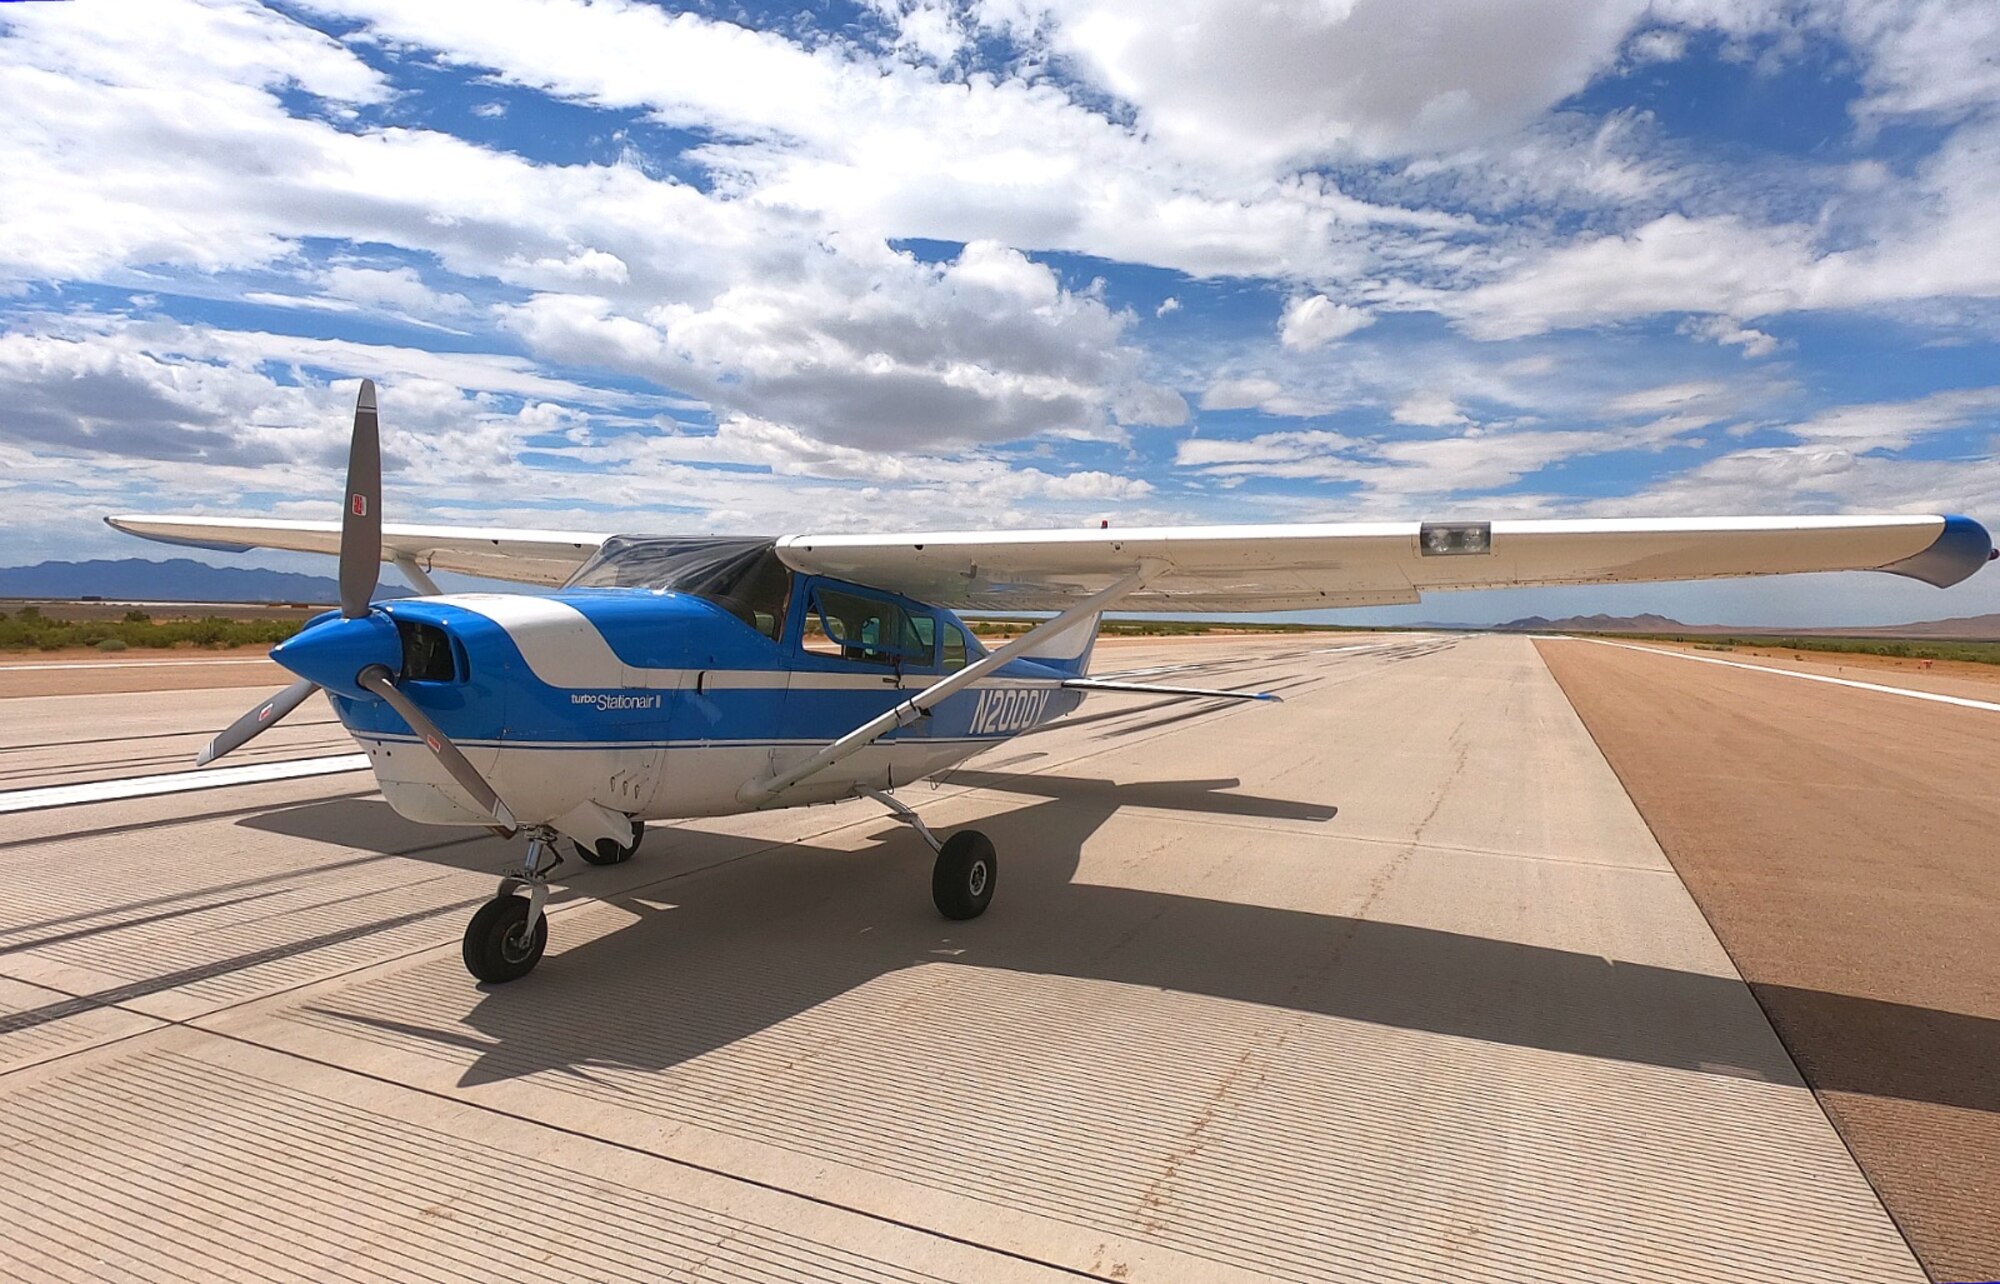 A 1968 Cessna 206 with ROBOpilot installed preparing for engine start on the runway at Dugway Proving Ground, Utah. (Courtesy photo)